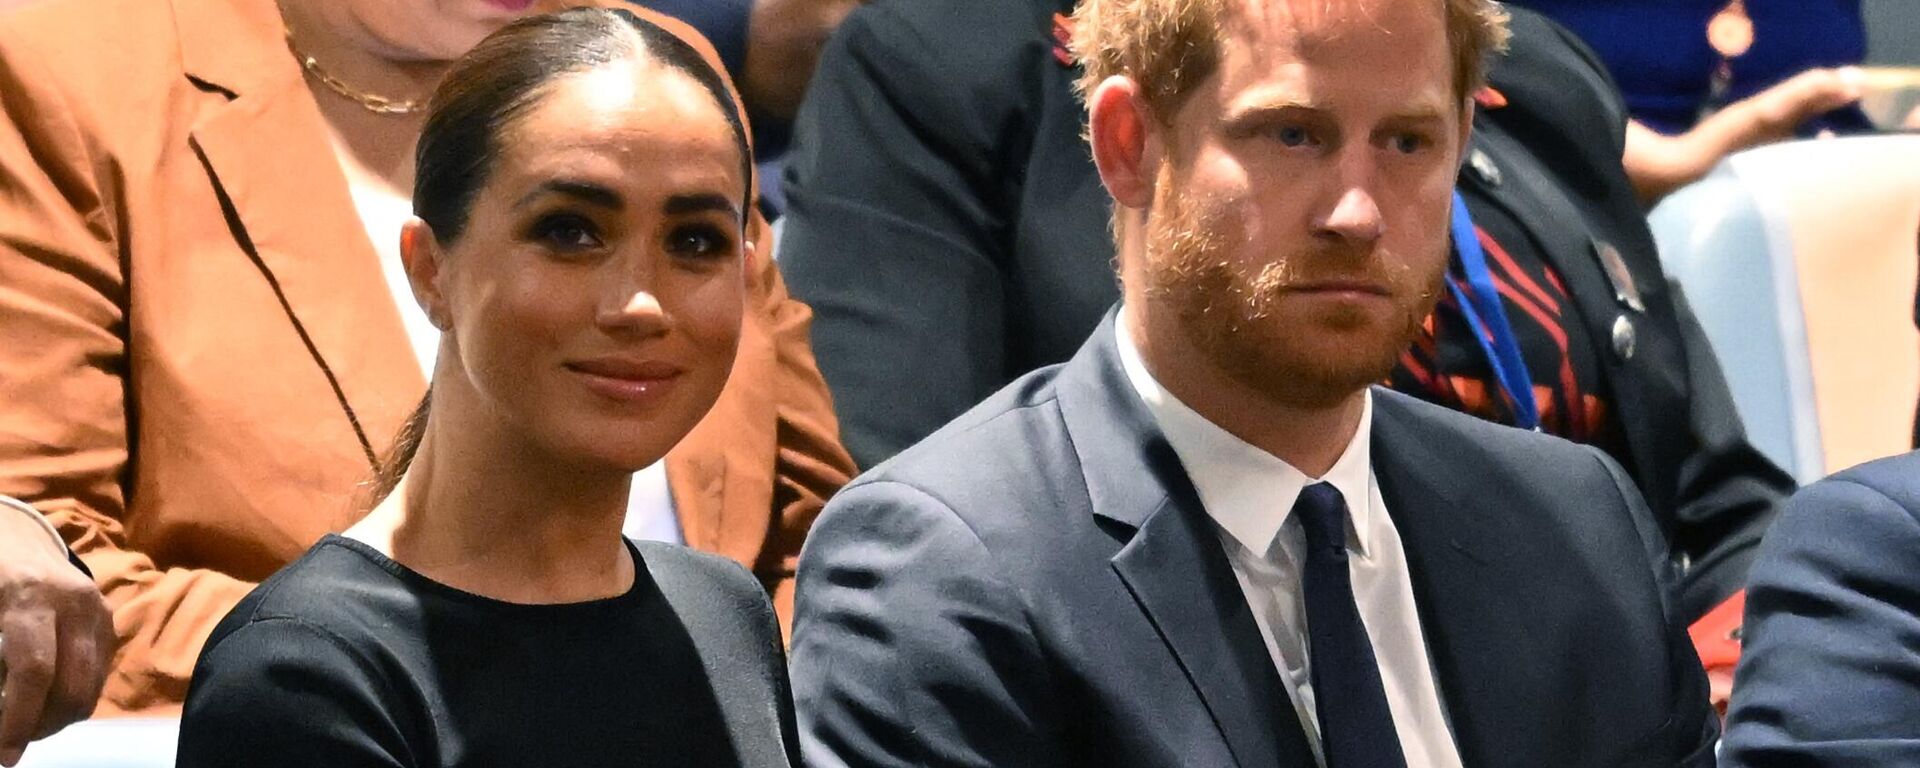 Prince Harry (R) and Meghan Markle (L), the Duke and Duchess of Sussex, attend the 2020 UN Nelson Mandela Prize award ceremony at the United Nations in New York on July 18, 2022 - Sputnik International, 1920, 11.12.2022